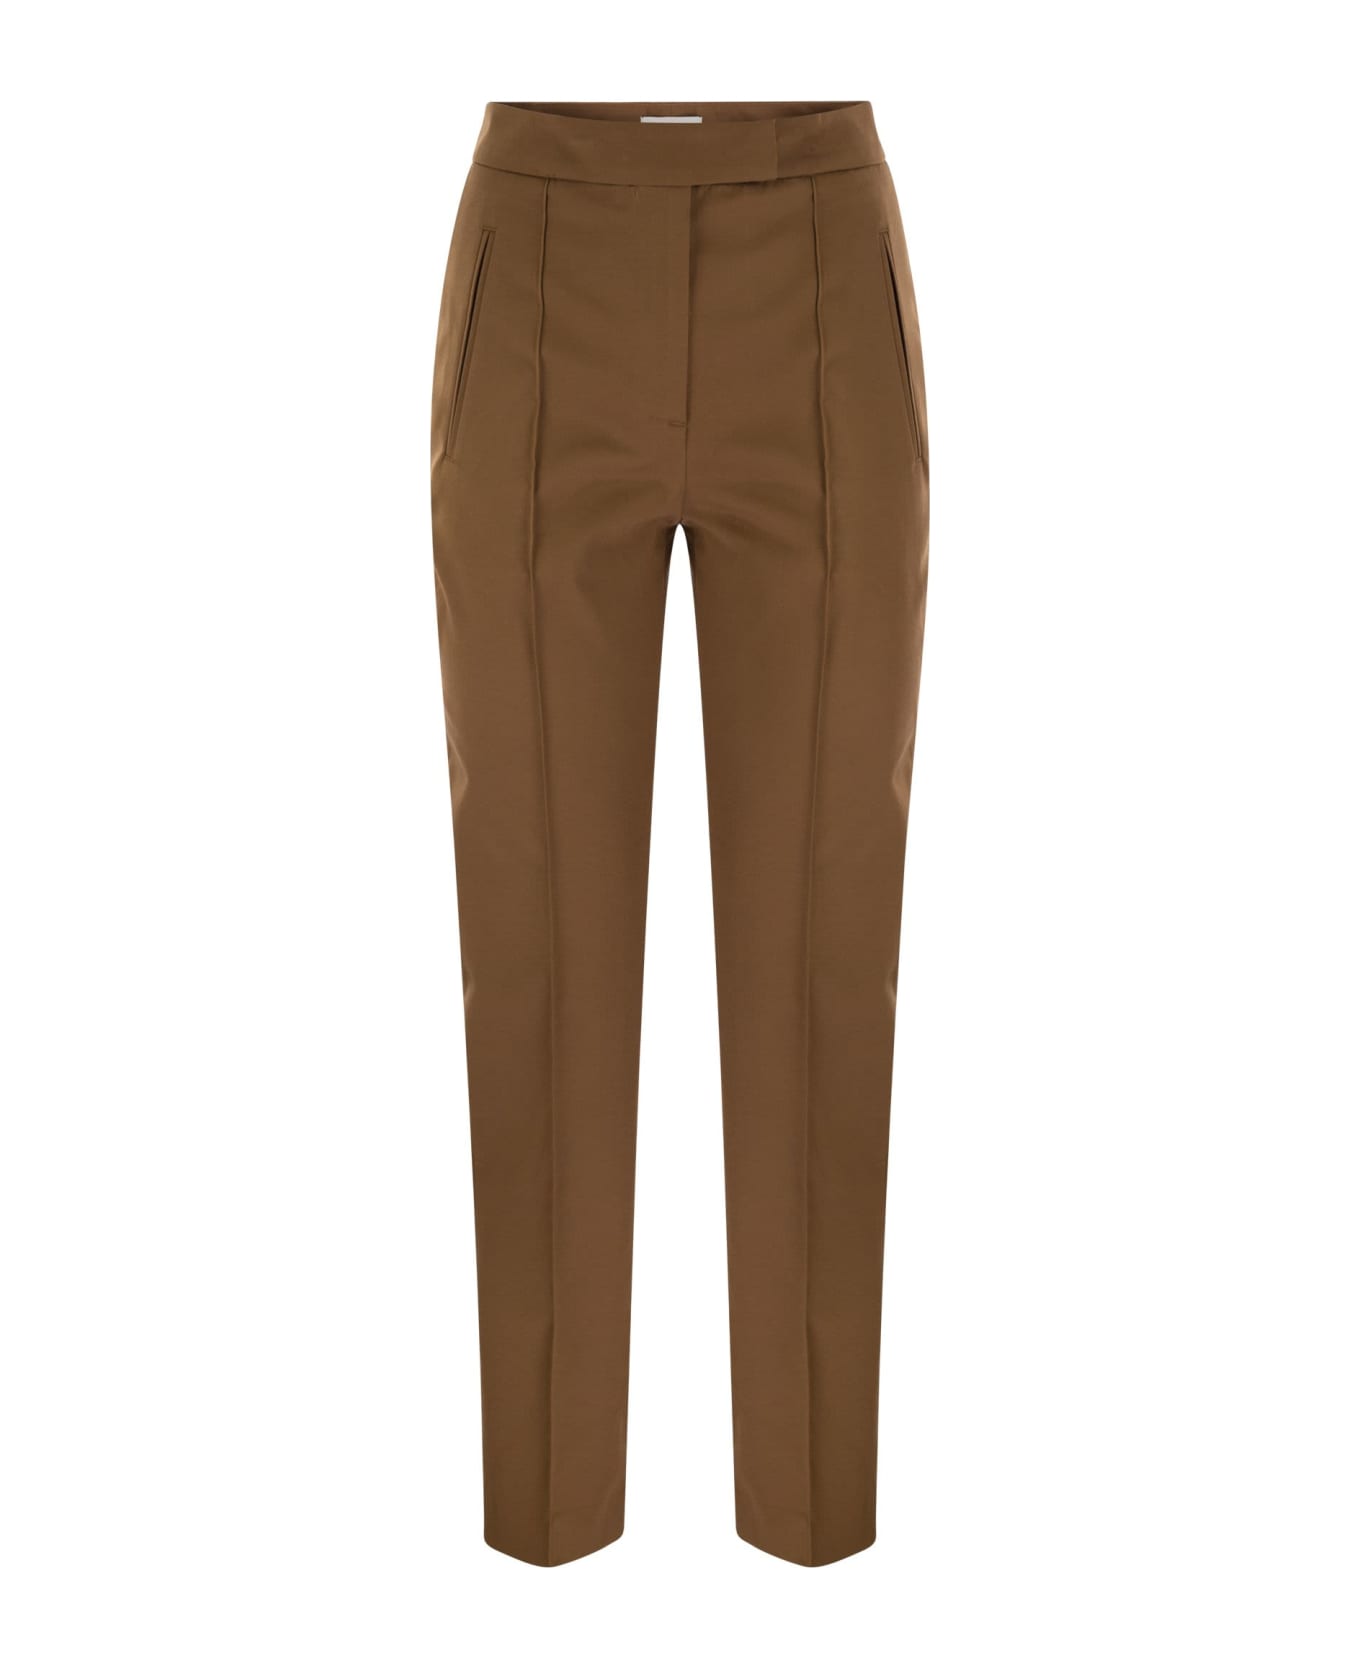 PT Torino Frida - Cotton And Silk Trousers With Pleat - Brown ボトムス